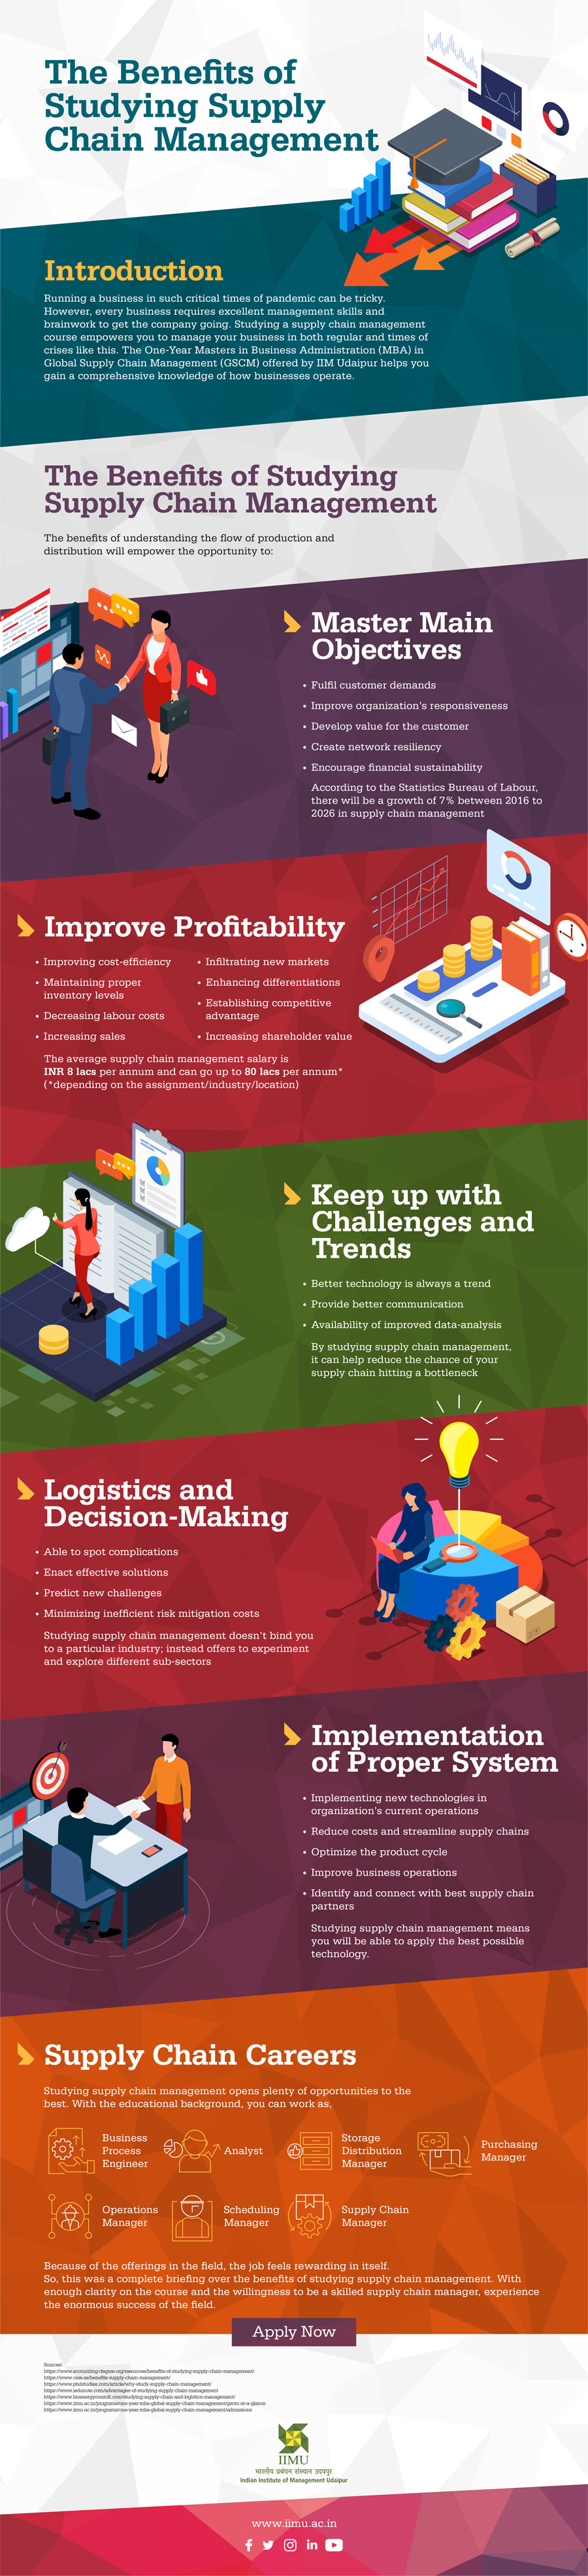 Infographic_iimu_the_benefits_of_studying_supply_chain_management